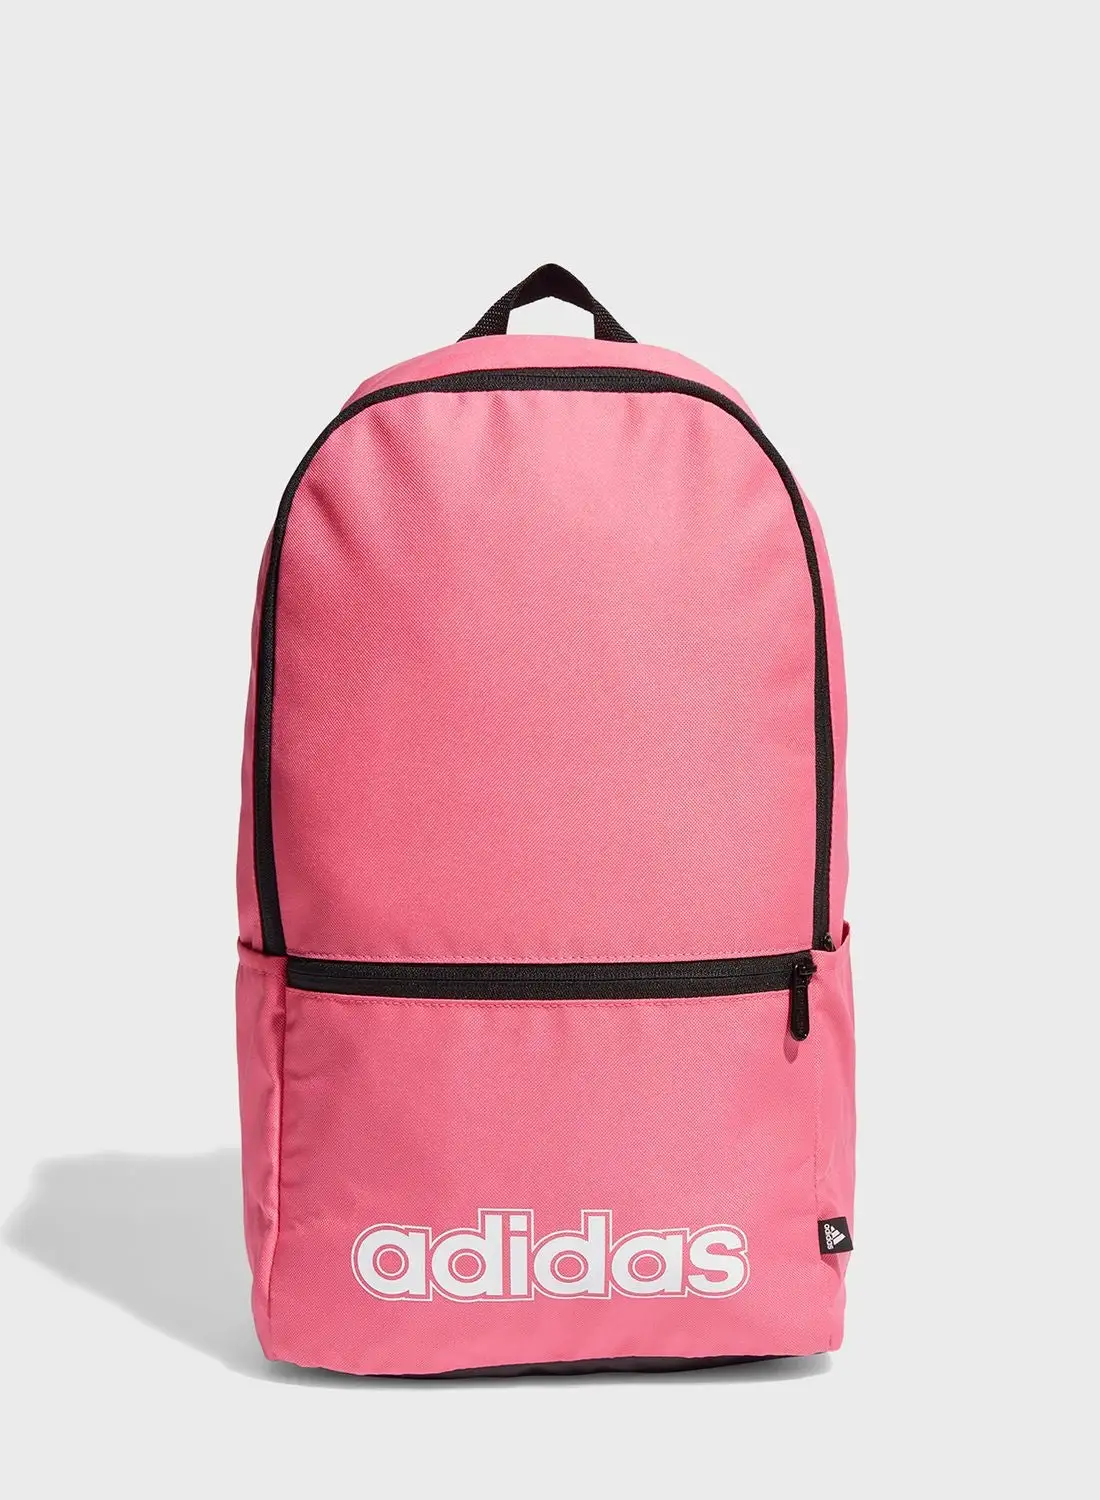 Adidas Linear Classic Backpack